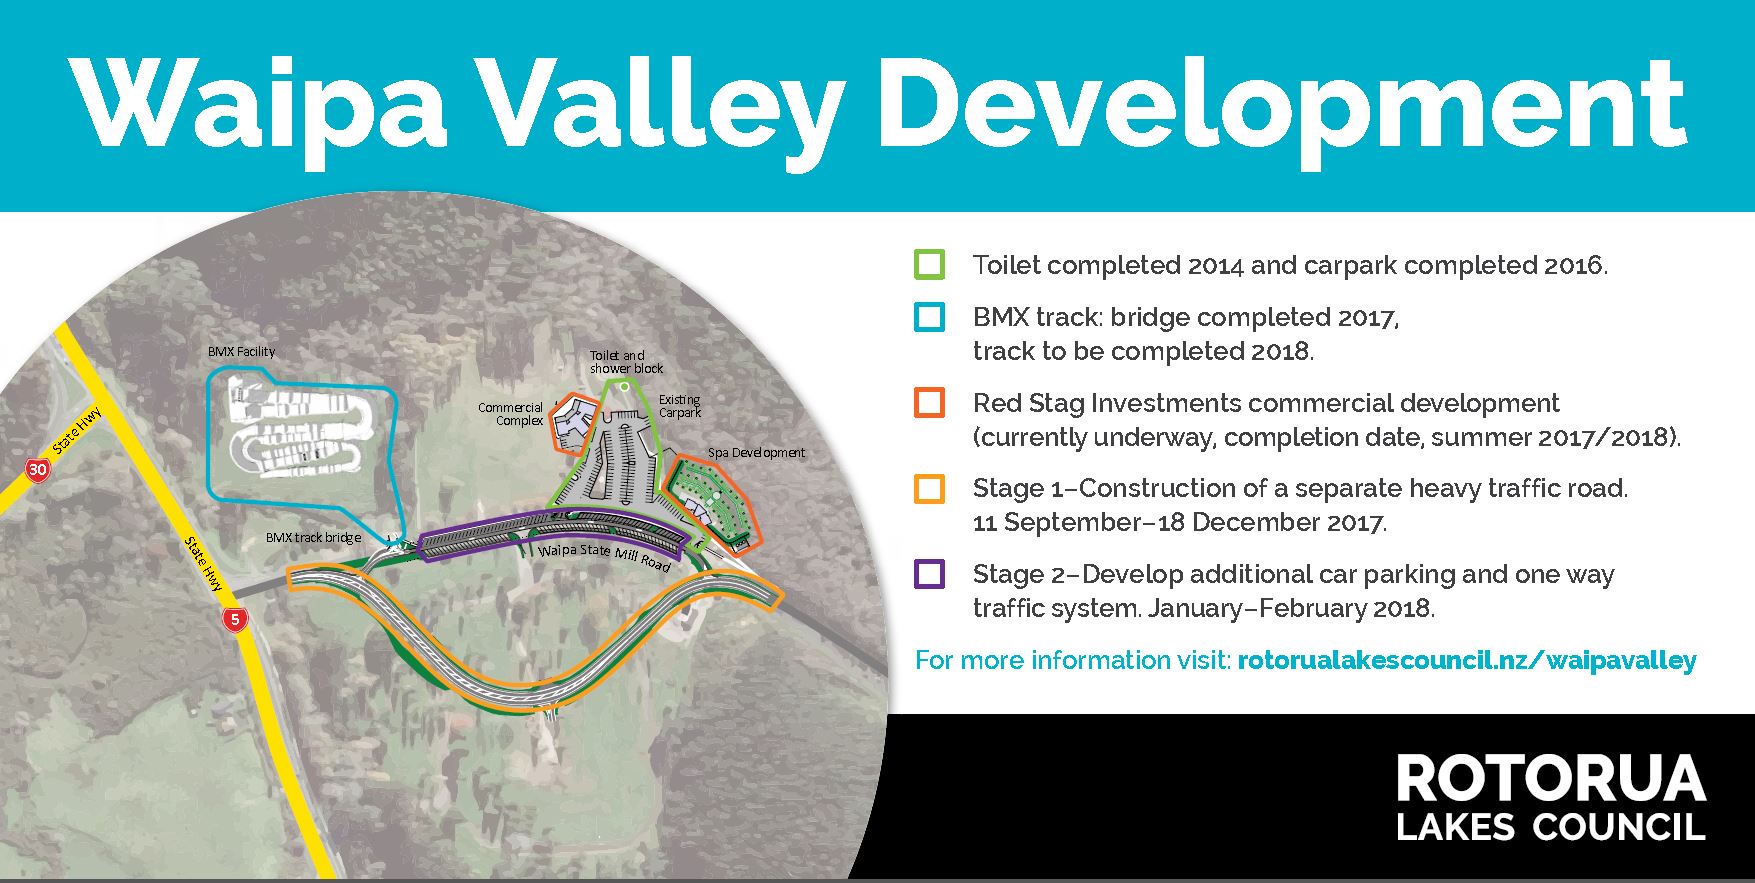 One of the storyboards from the Waipa Valley Development with a map and key